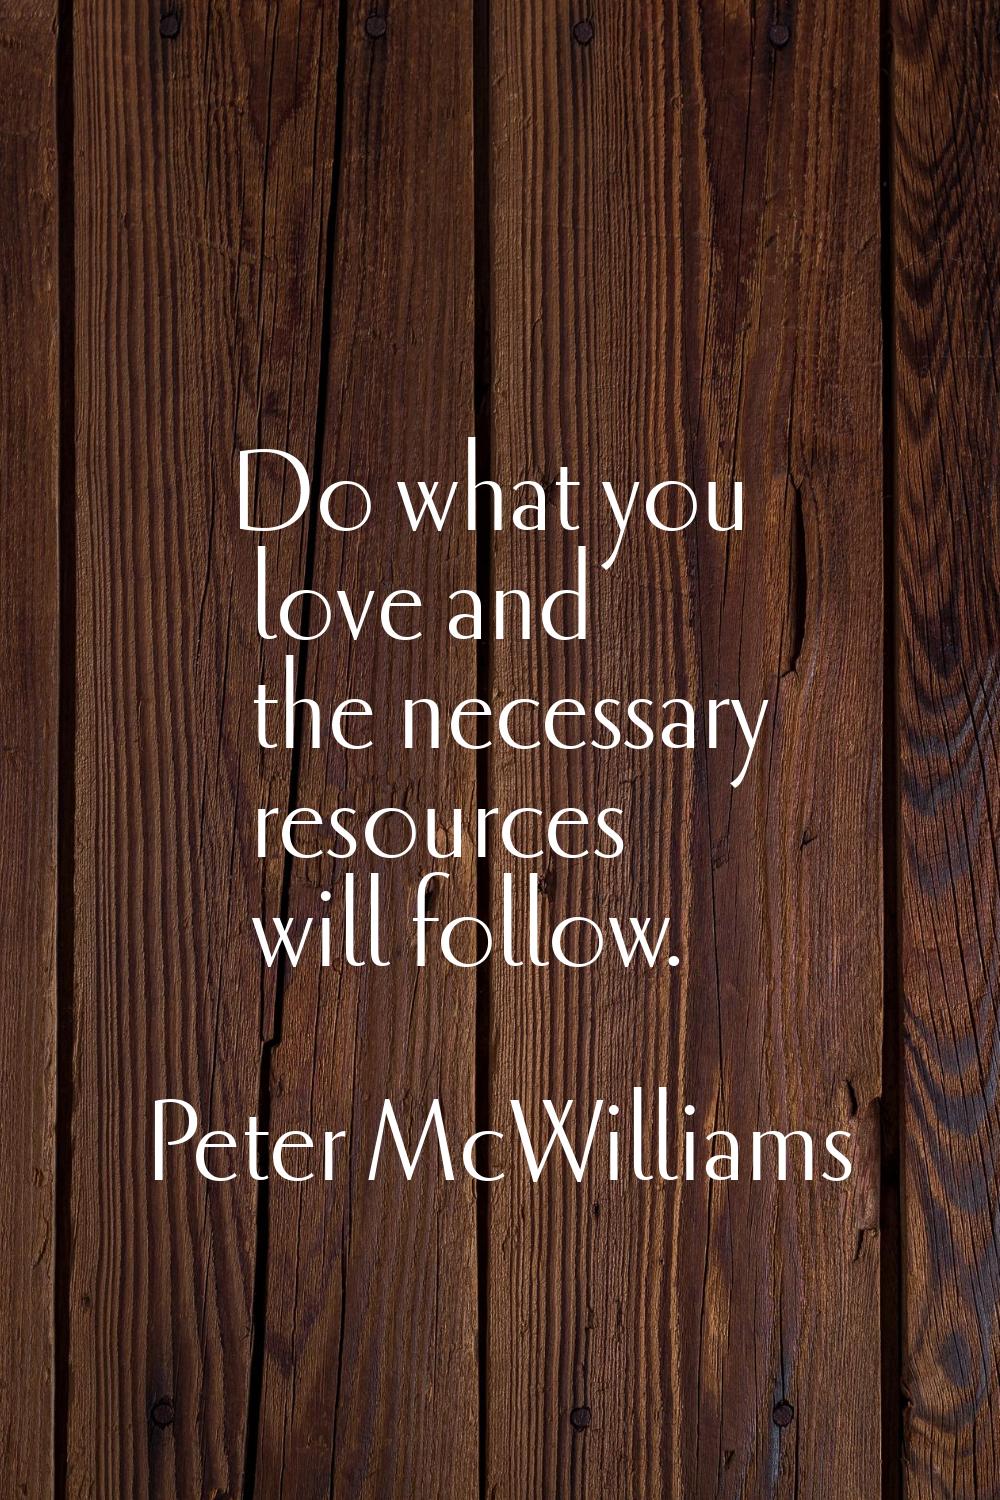 Do what you love and the necessary resources will follow.